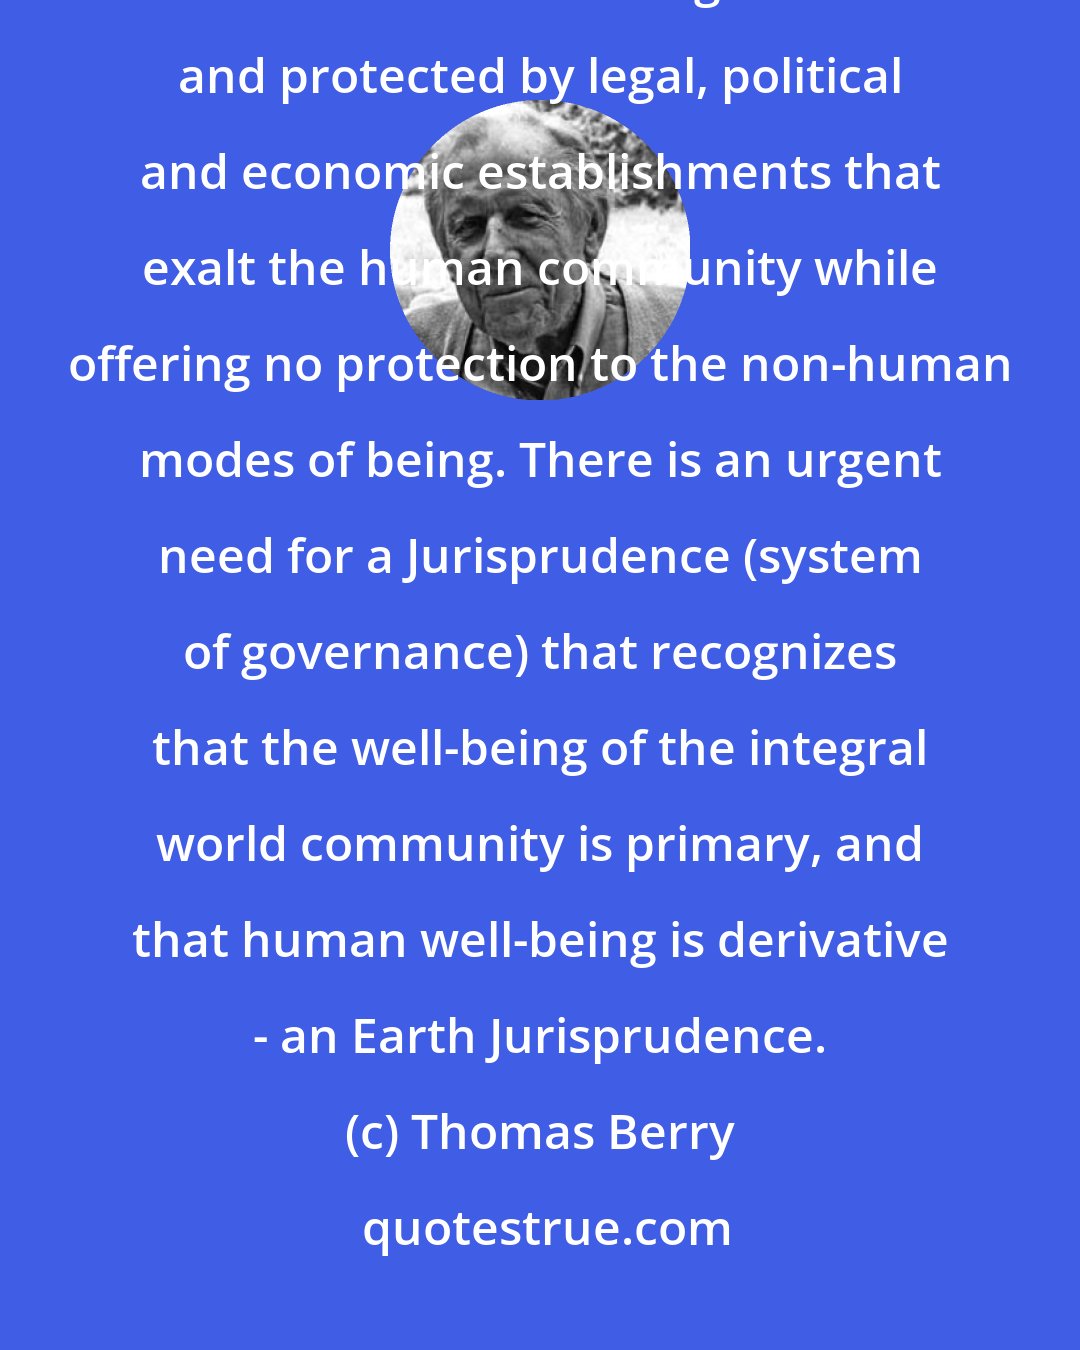 Thomas Berry: The planet Earth in its present mode of florescence is being devastated. This devastation is being fostered and protected by legal, political and economic establishments that exalt the human community while offering no protection to the non-human modes of being. There is an urgent need for a Jurisprudence (system of governance) that recognizes that the well-being of the integral world community is primary, and that human well-being is derivative - an Earth Jurisprudence.